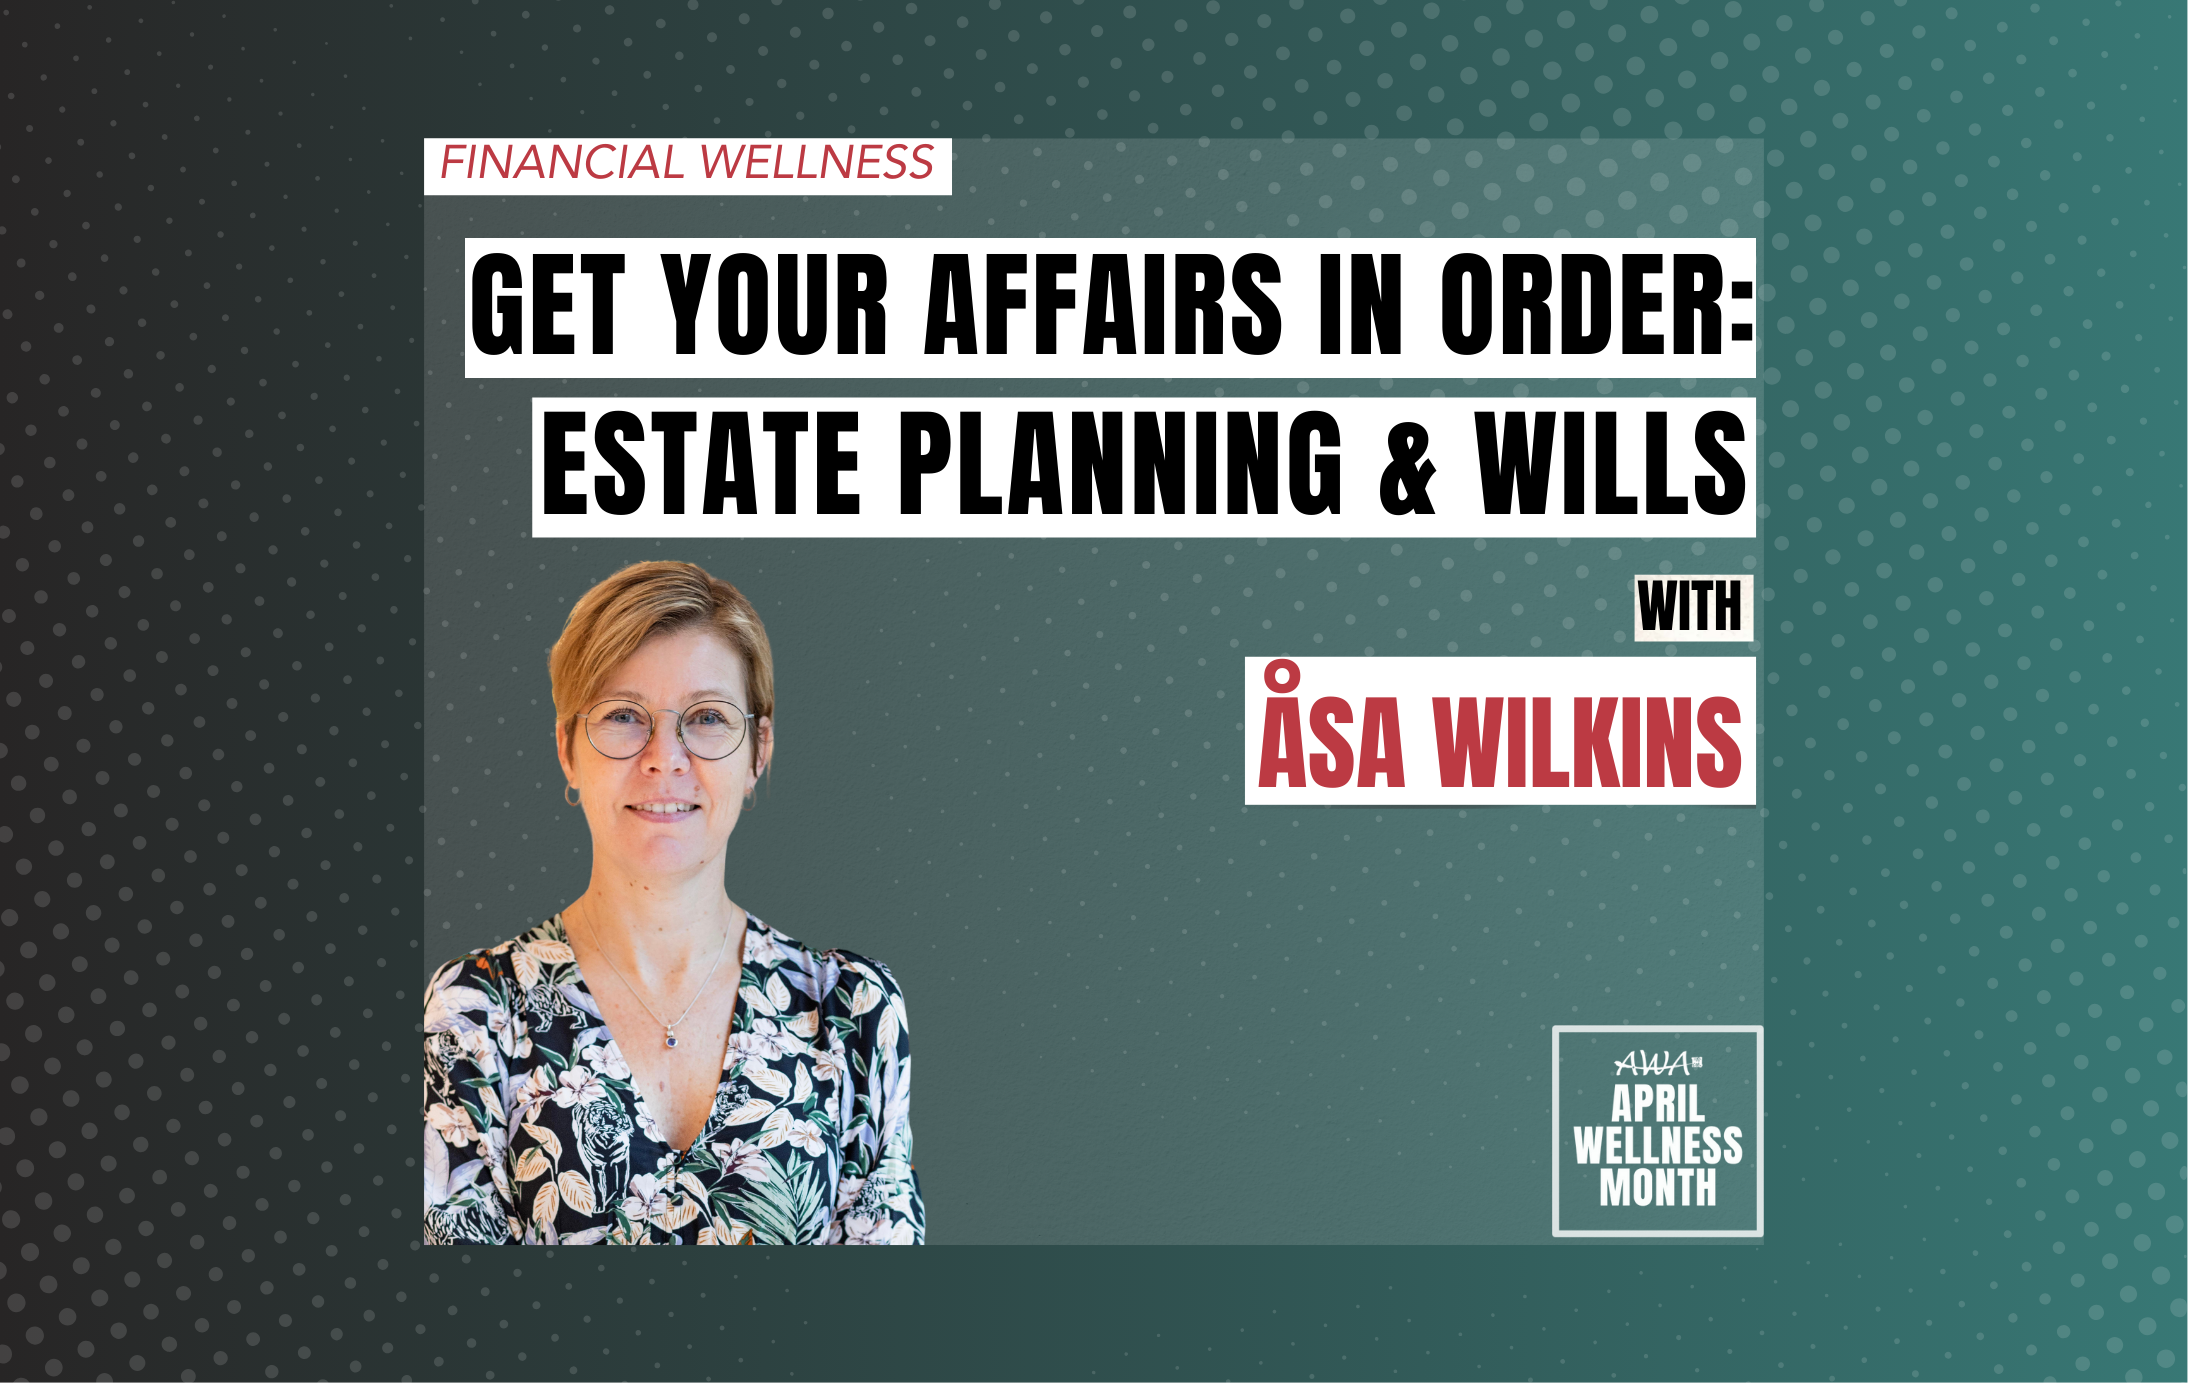 Get Your Affairs In Order: Estate Planning & Wills with Asa Wilkins